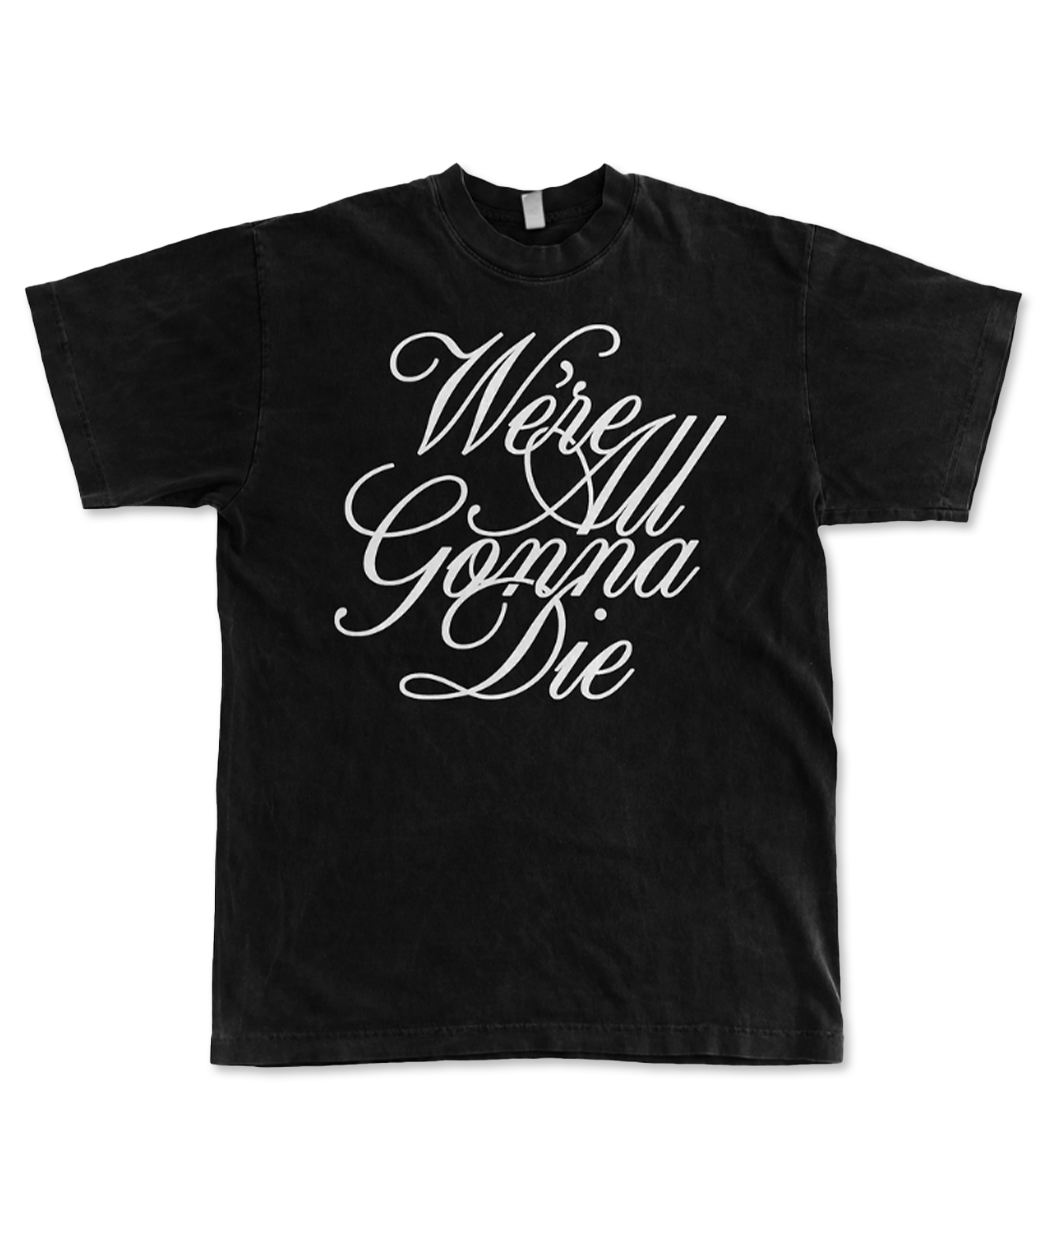 Black tee with script text in white, 